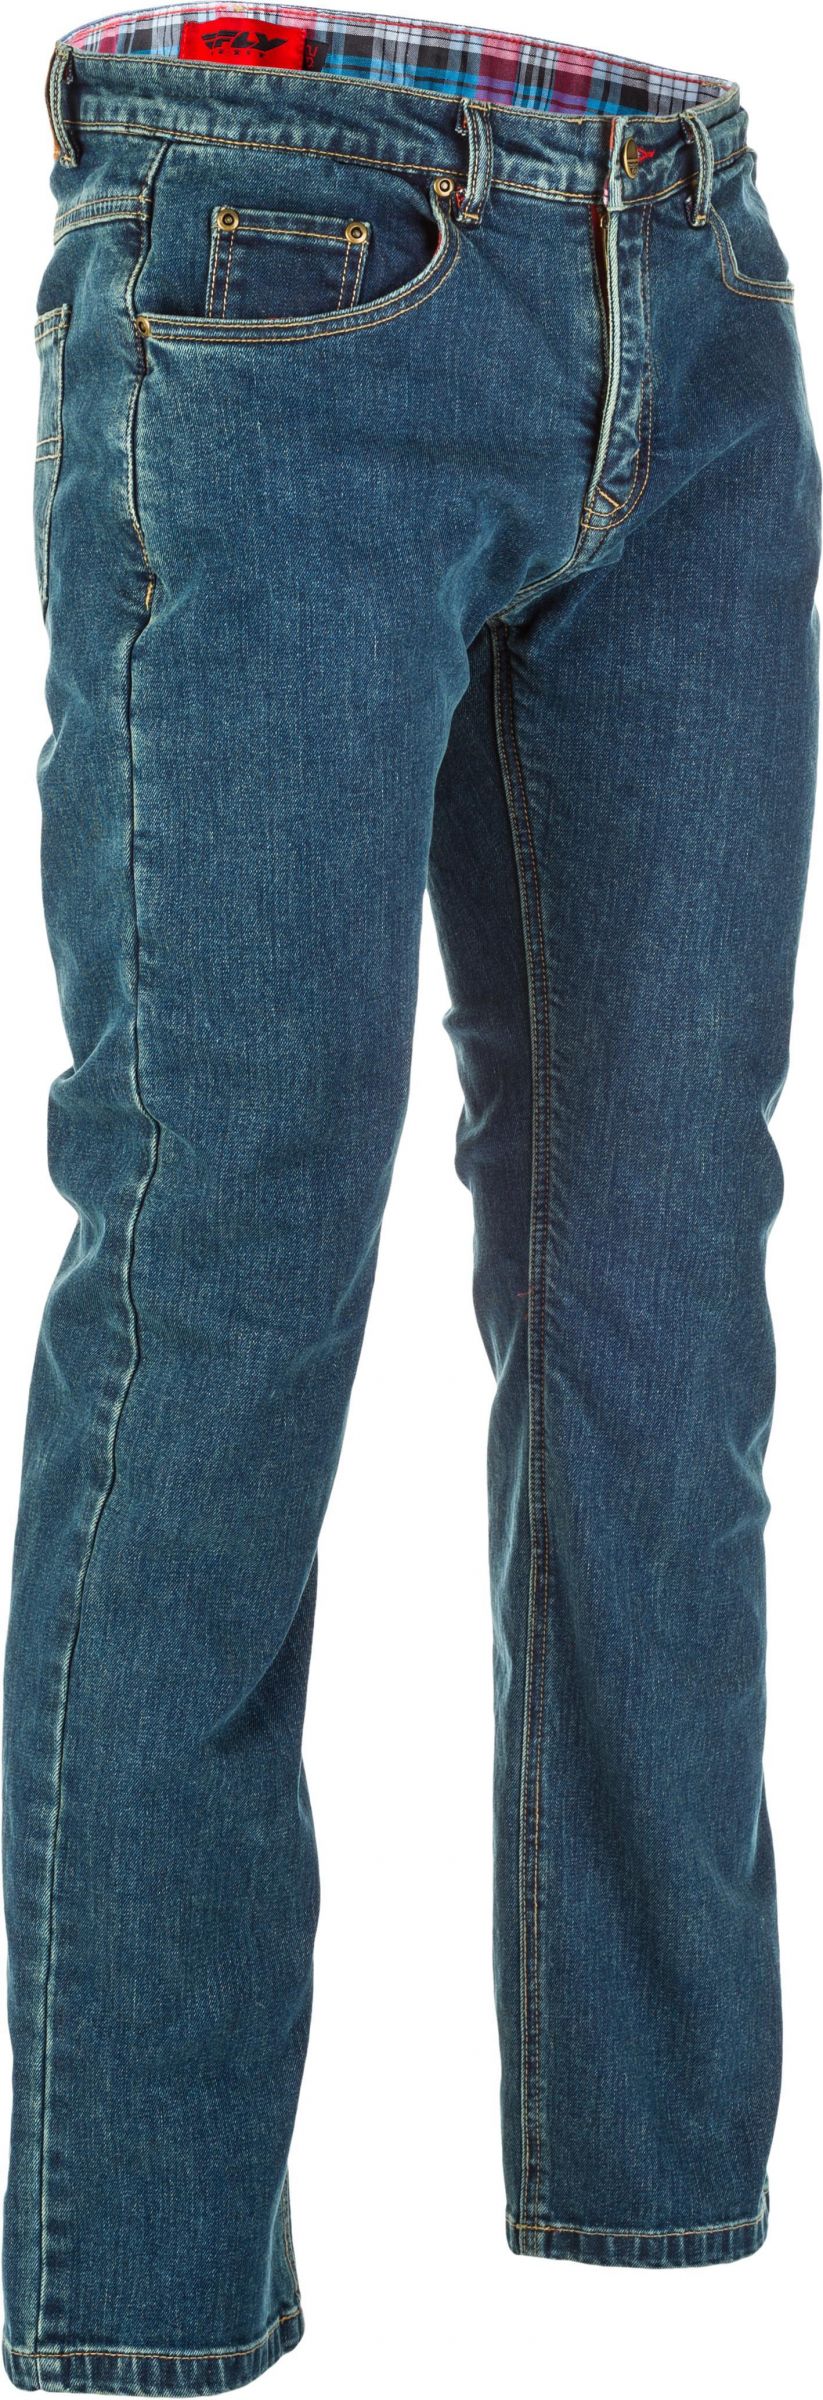 8RQN-FLY-RA-6049-478-30430 Resistance Jeans